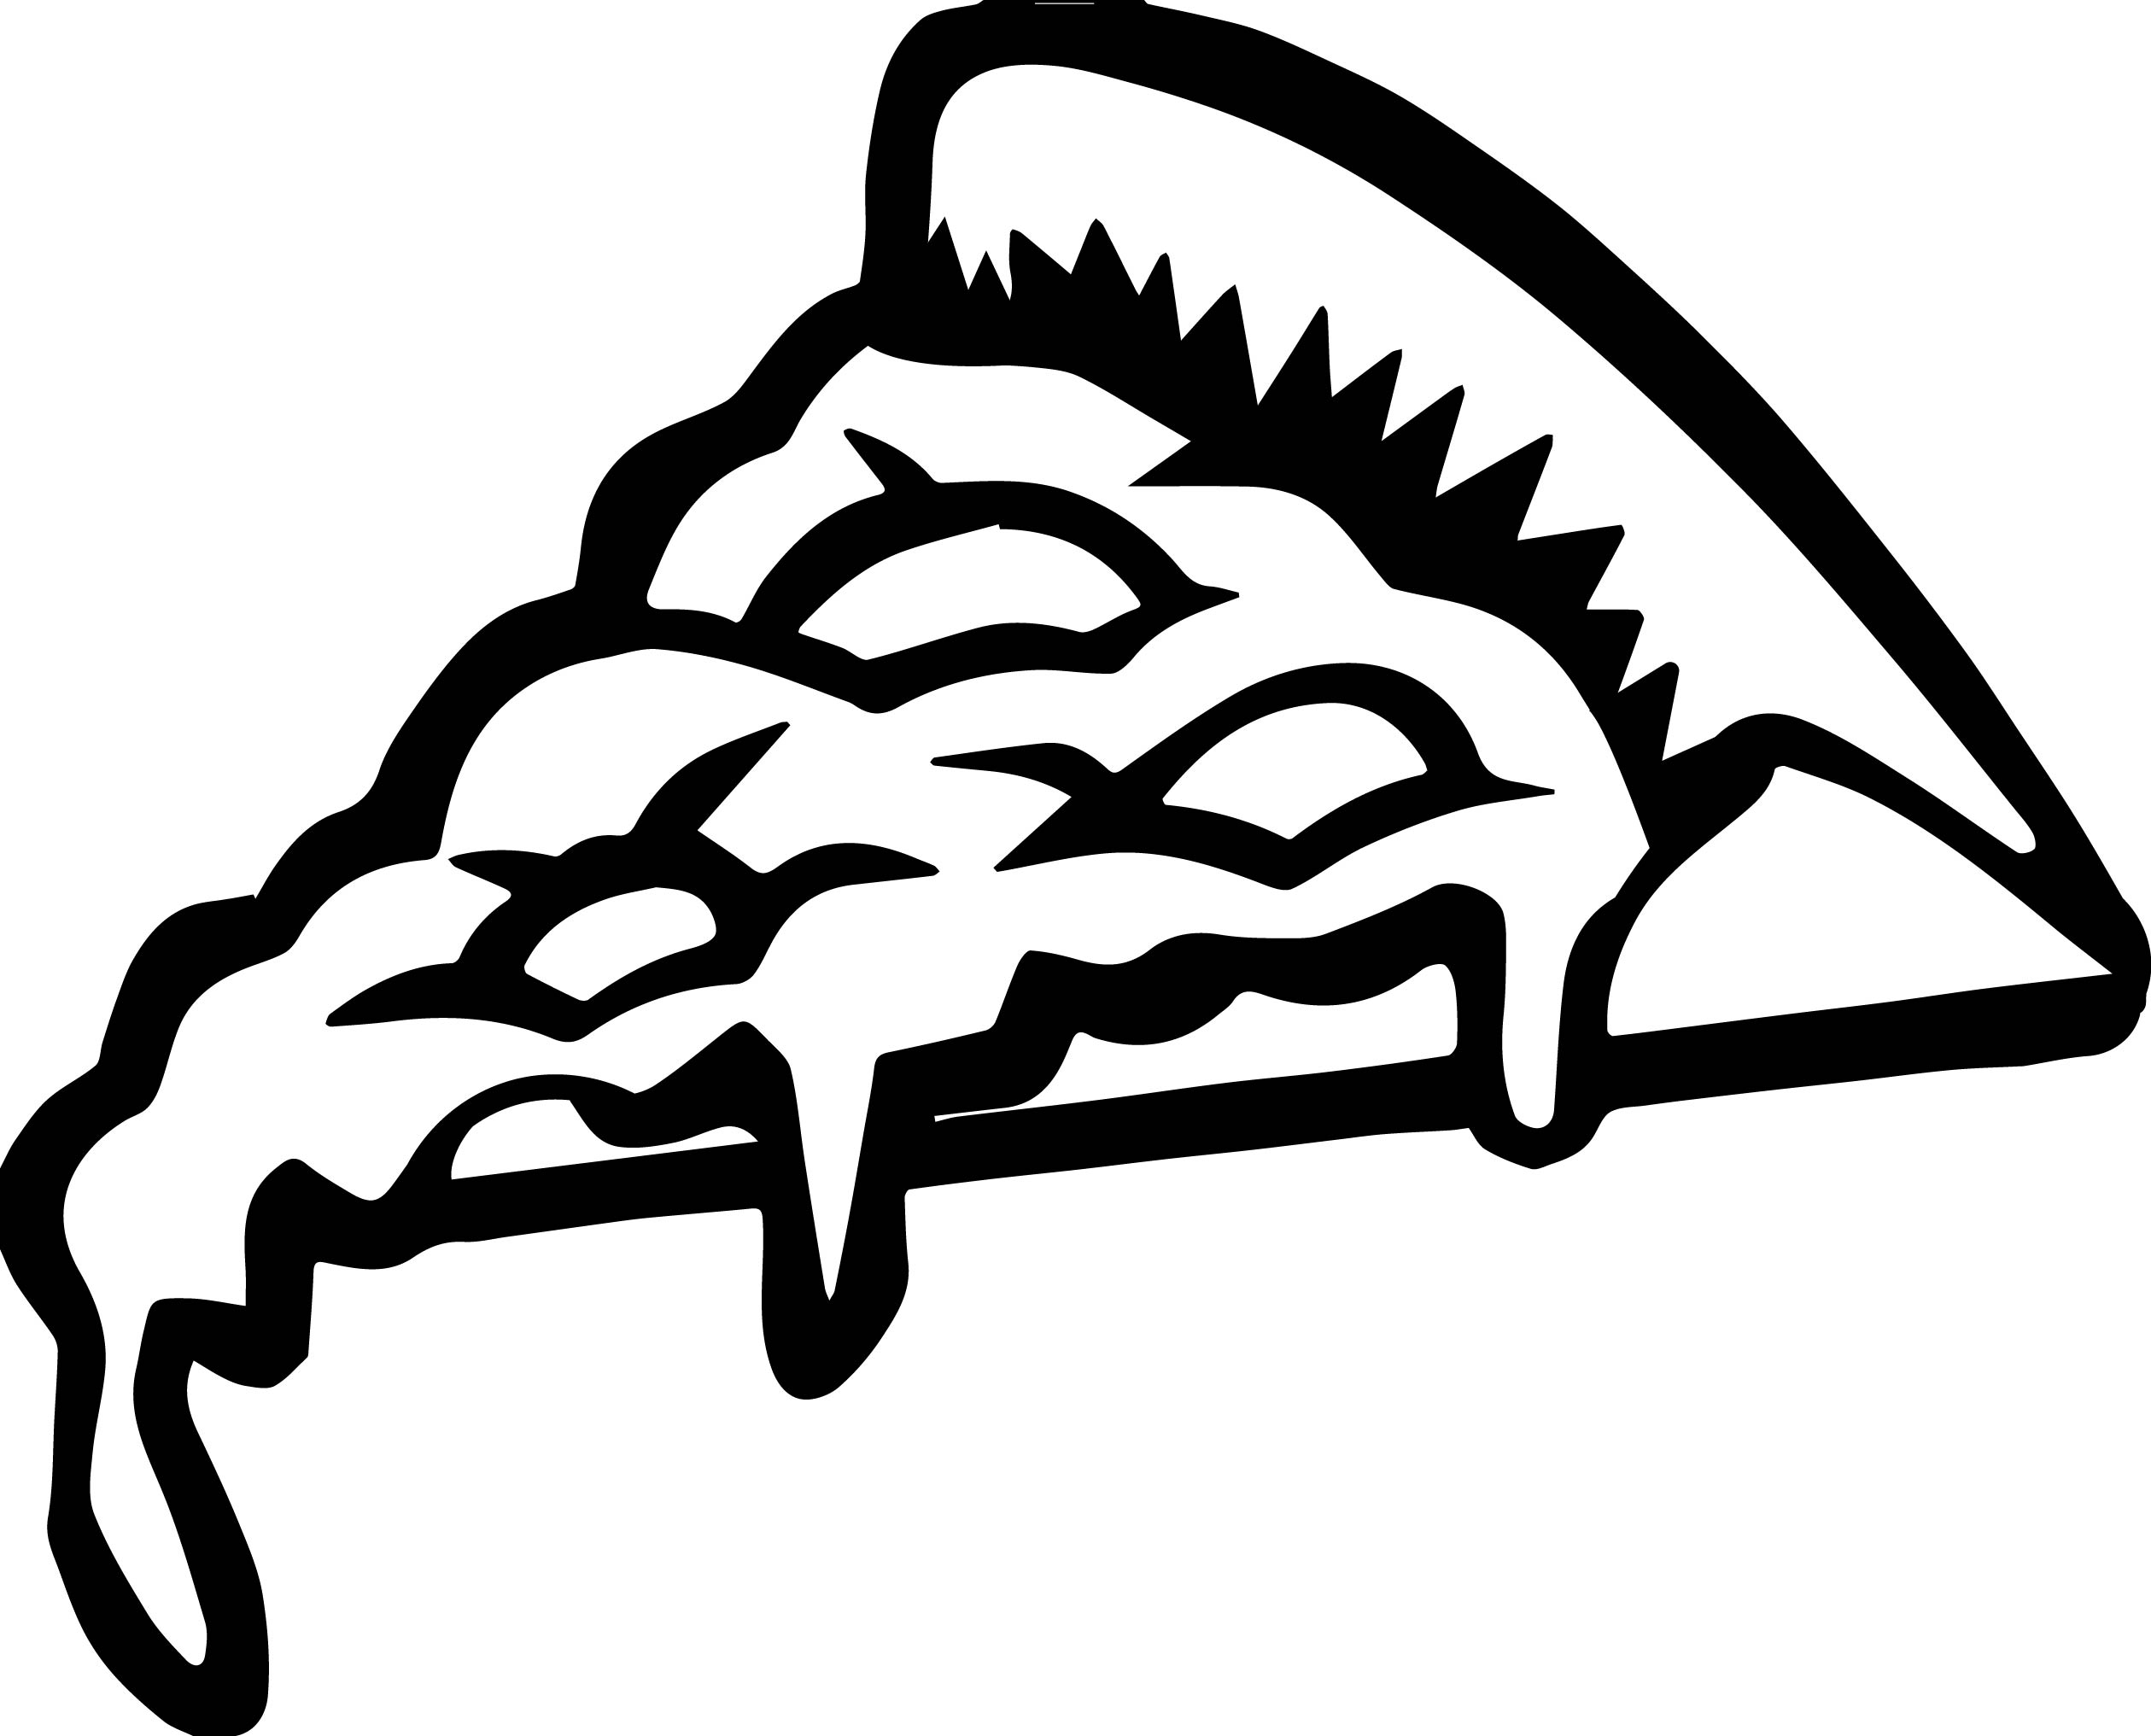 Whole Pizza Half Pizza Pizza Slice Dripping Cheese Coloring Page ...